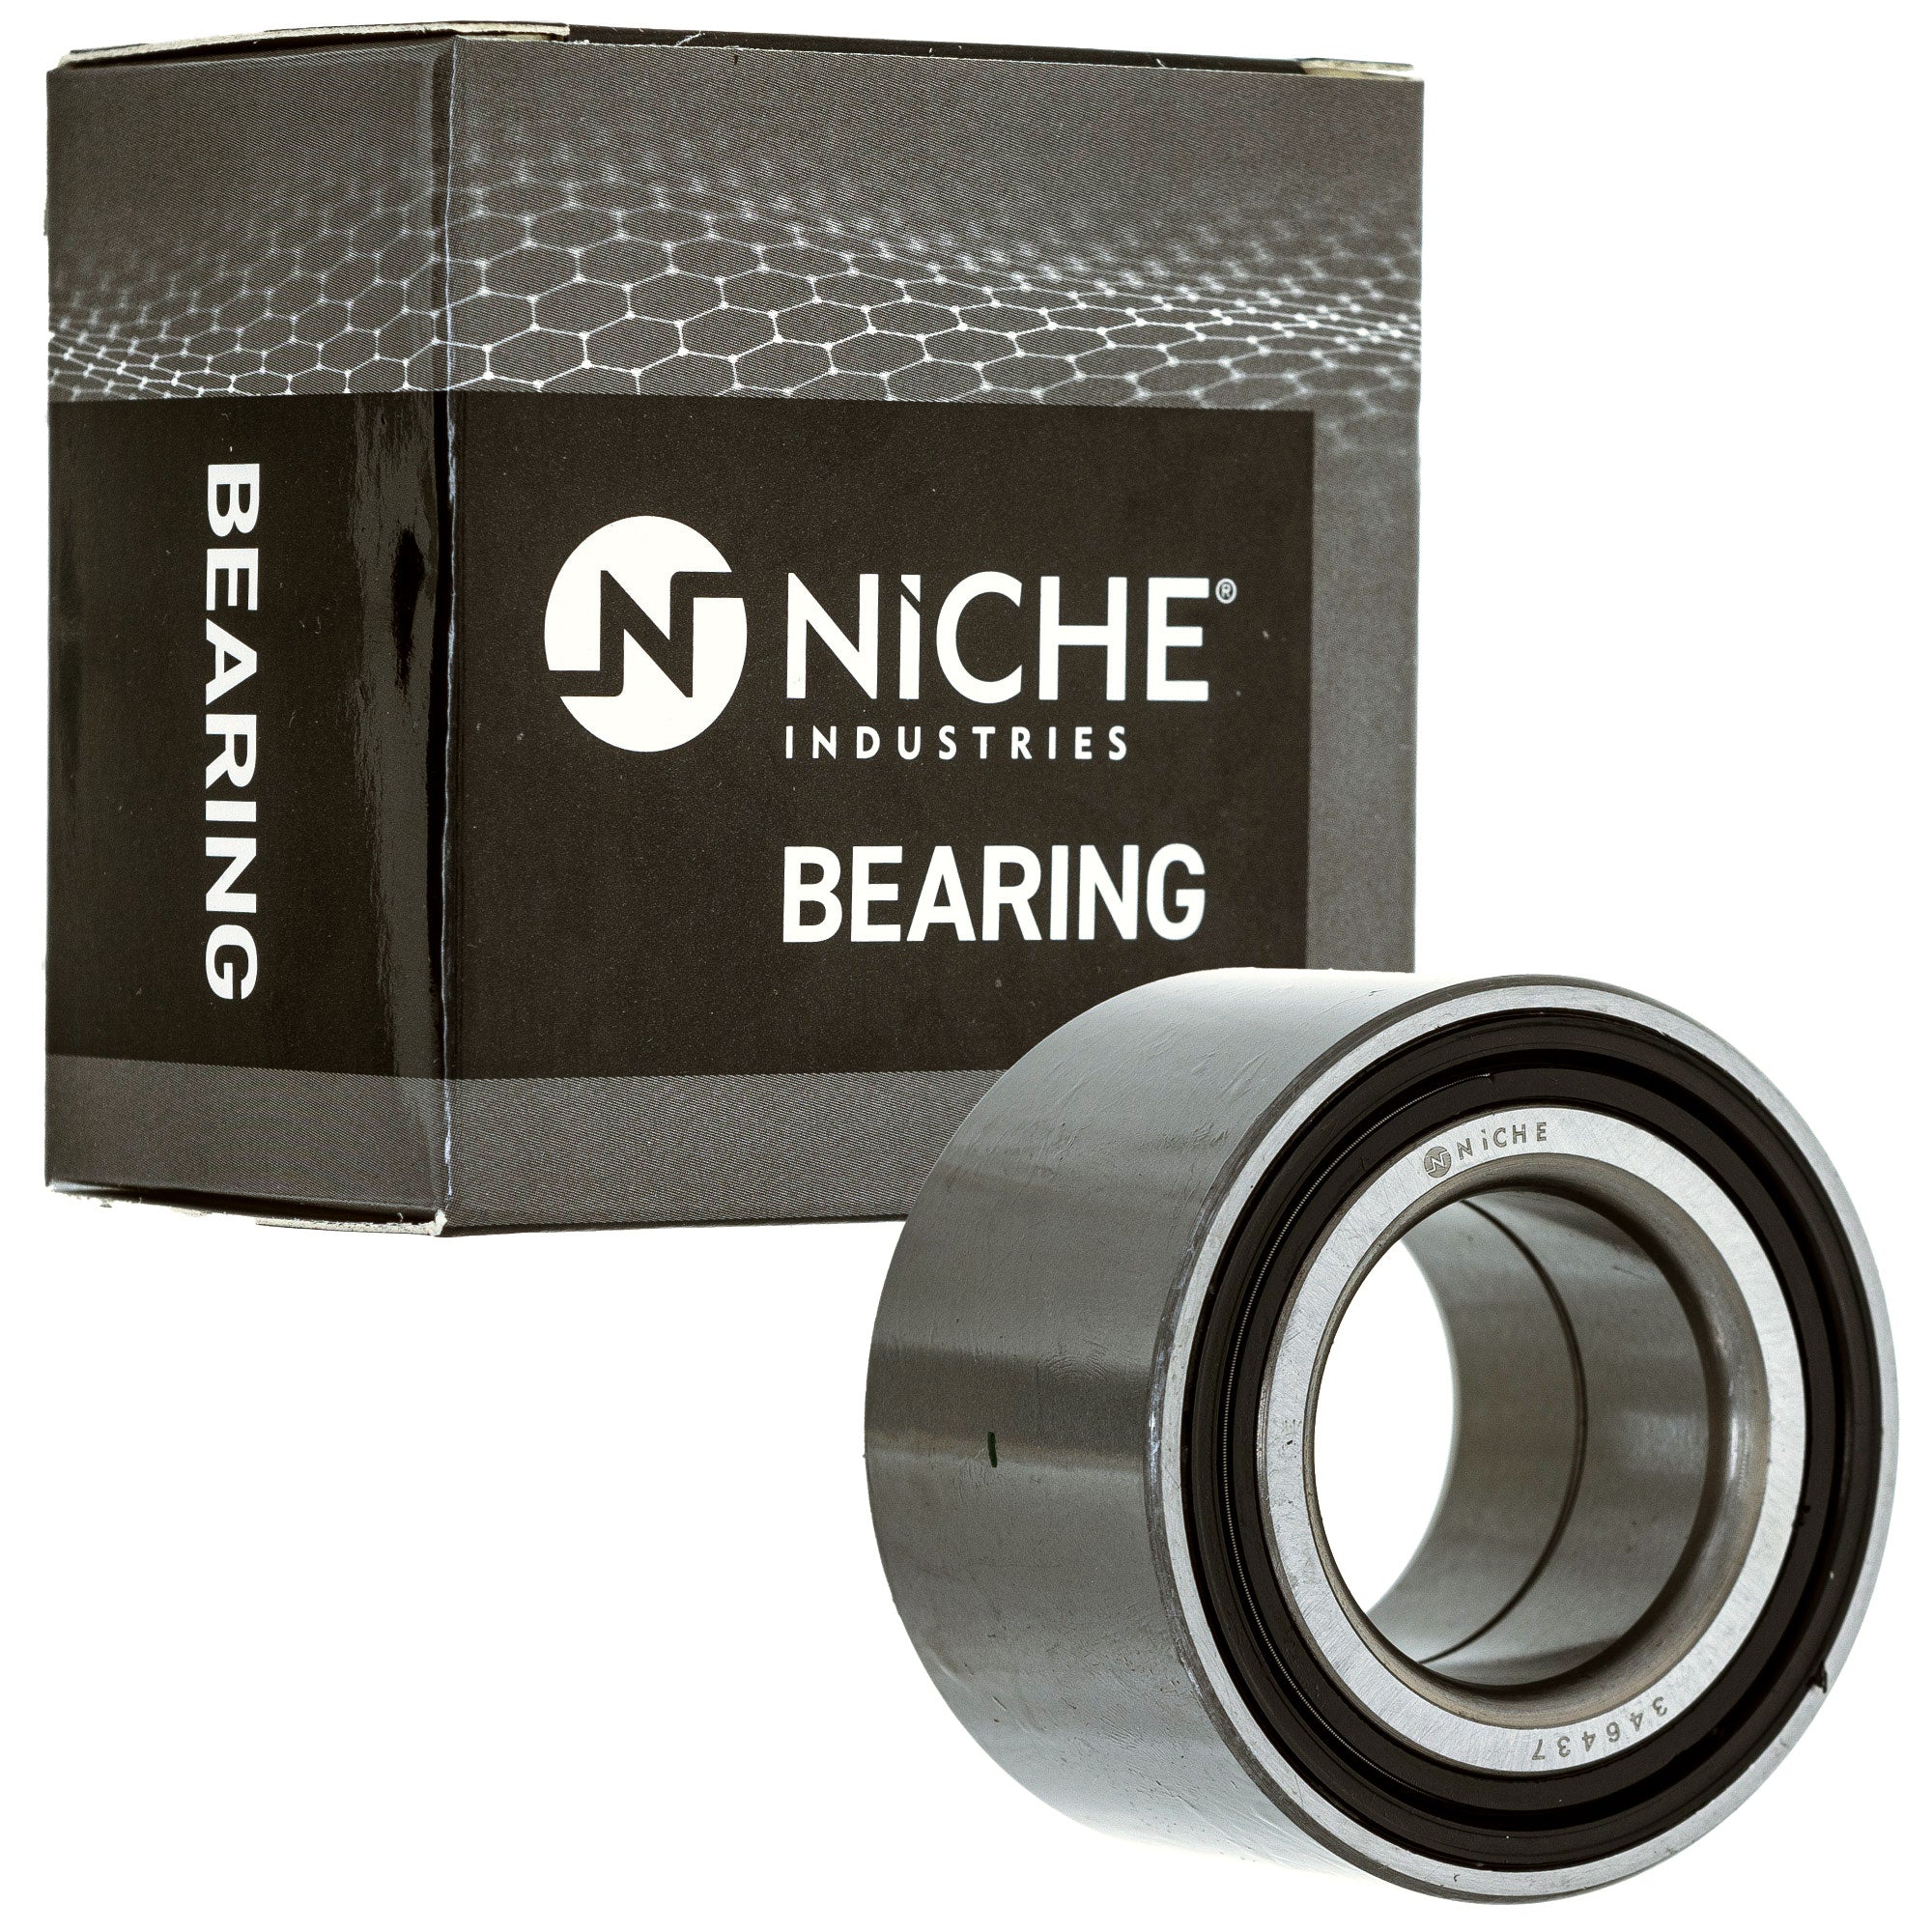 NICHE 519-CBB2200R Bearing for zOTHER Pioneer Big